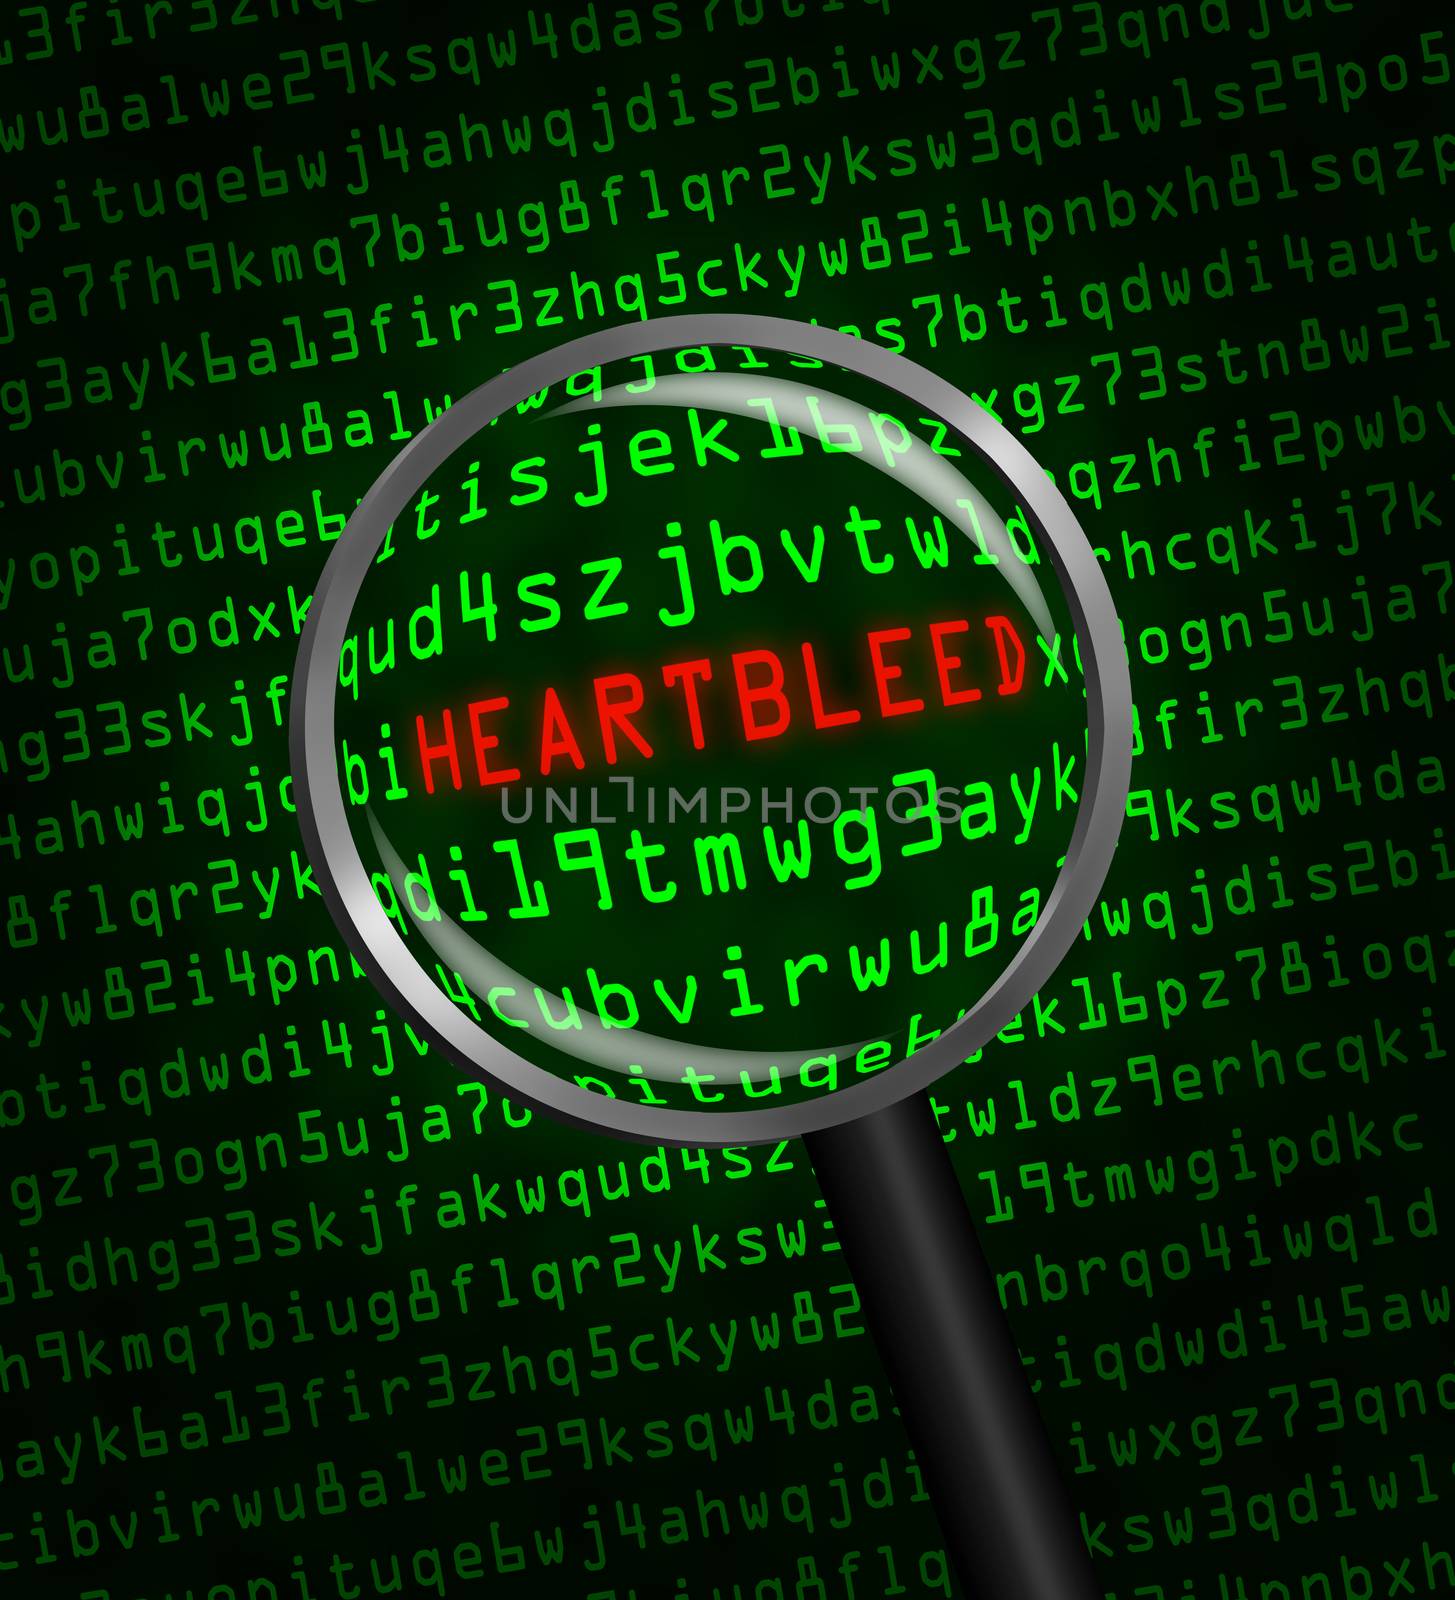 The word "Heartbleed" revealed in computer machine code through a magnifying glass 